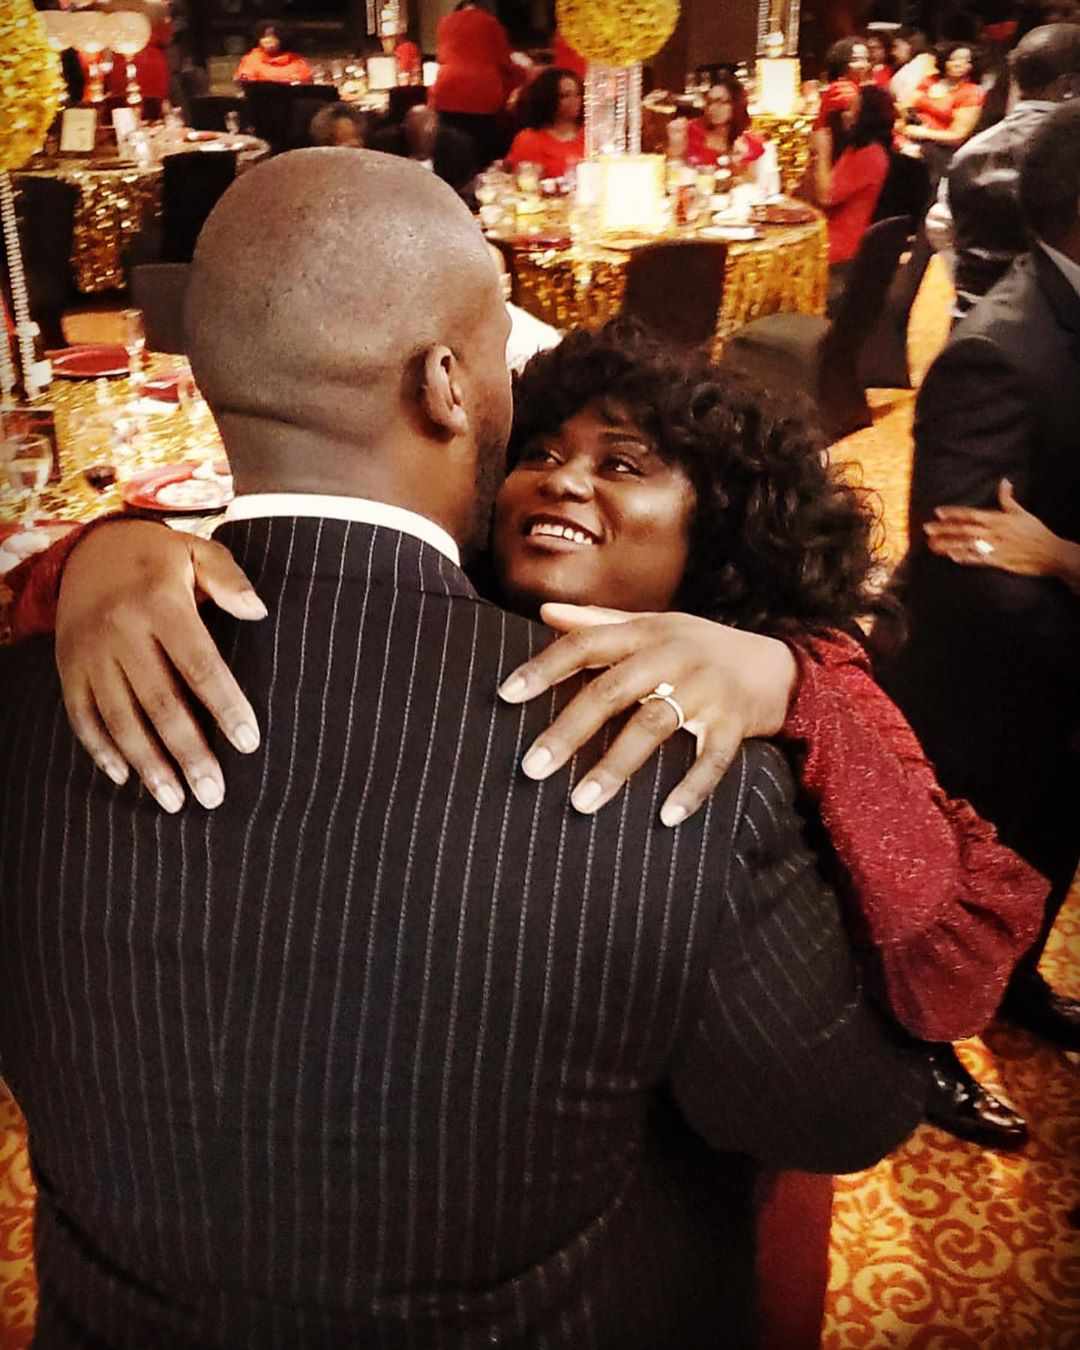 Orange Is the New Black Star Danielle Brooks Is Engaged to Her 'Best Friend'